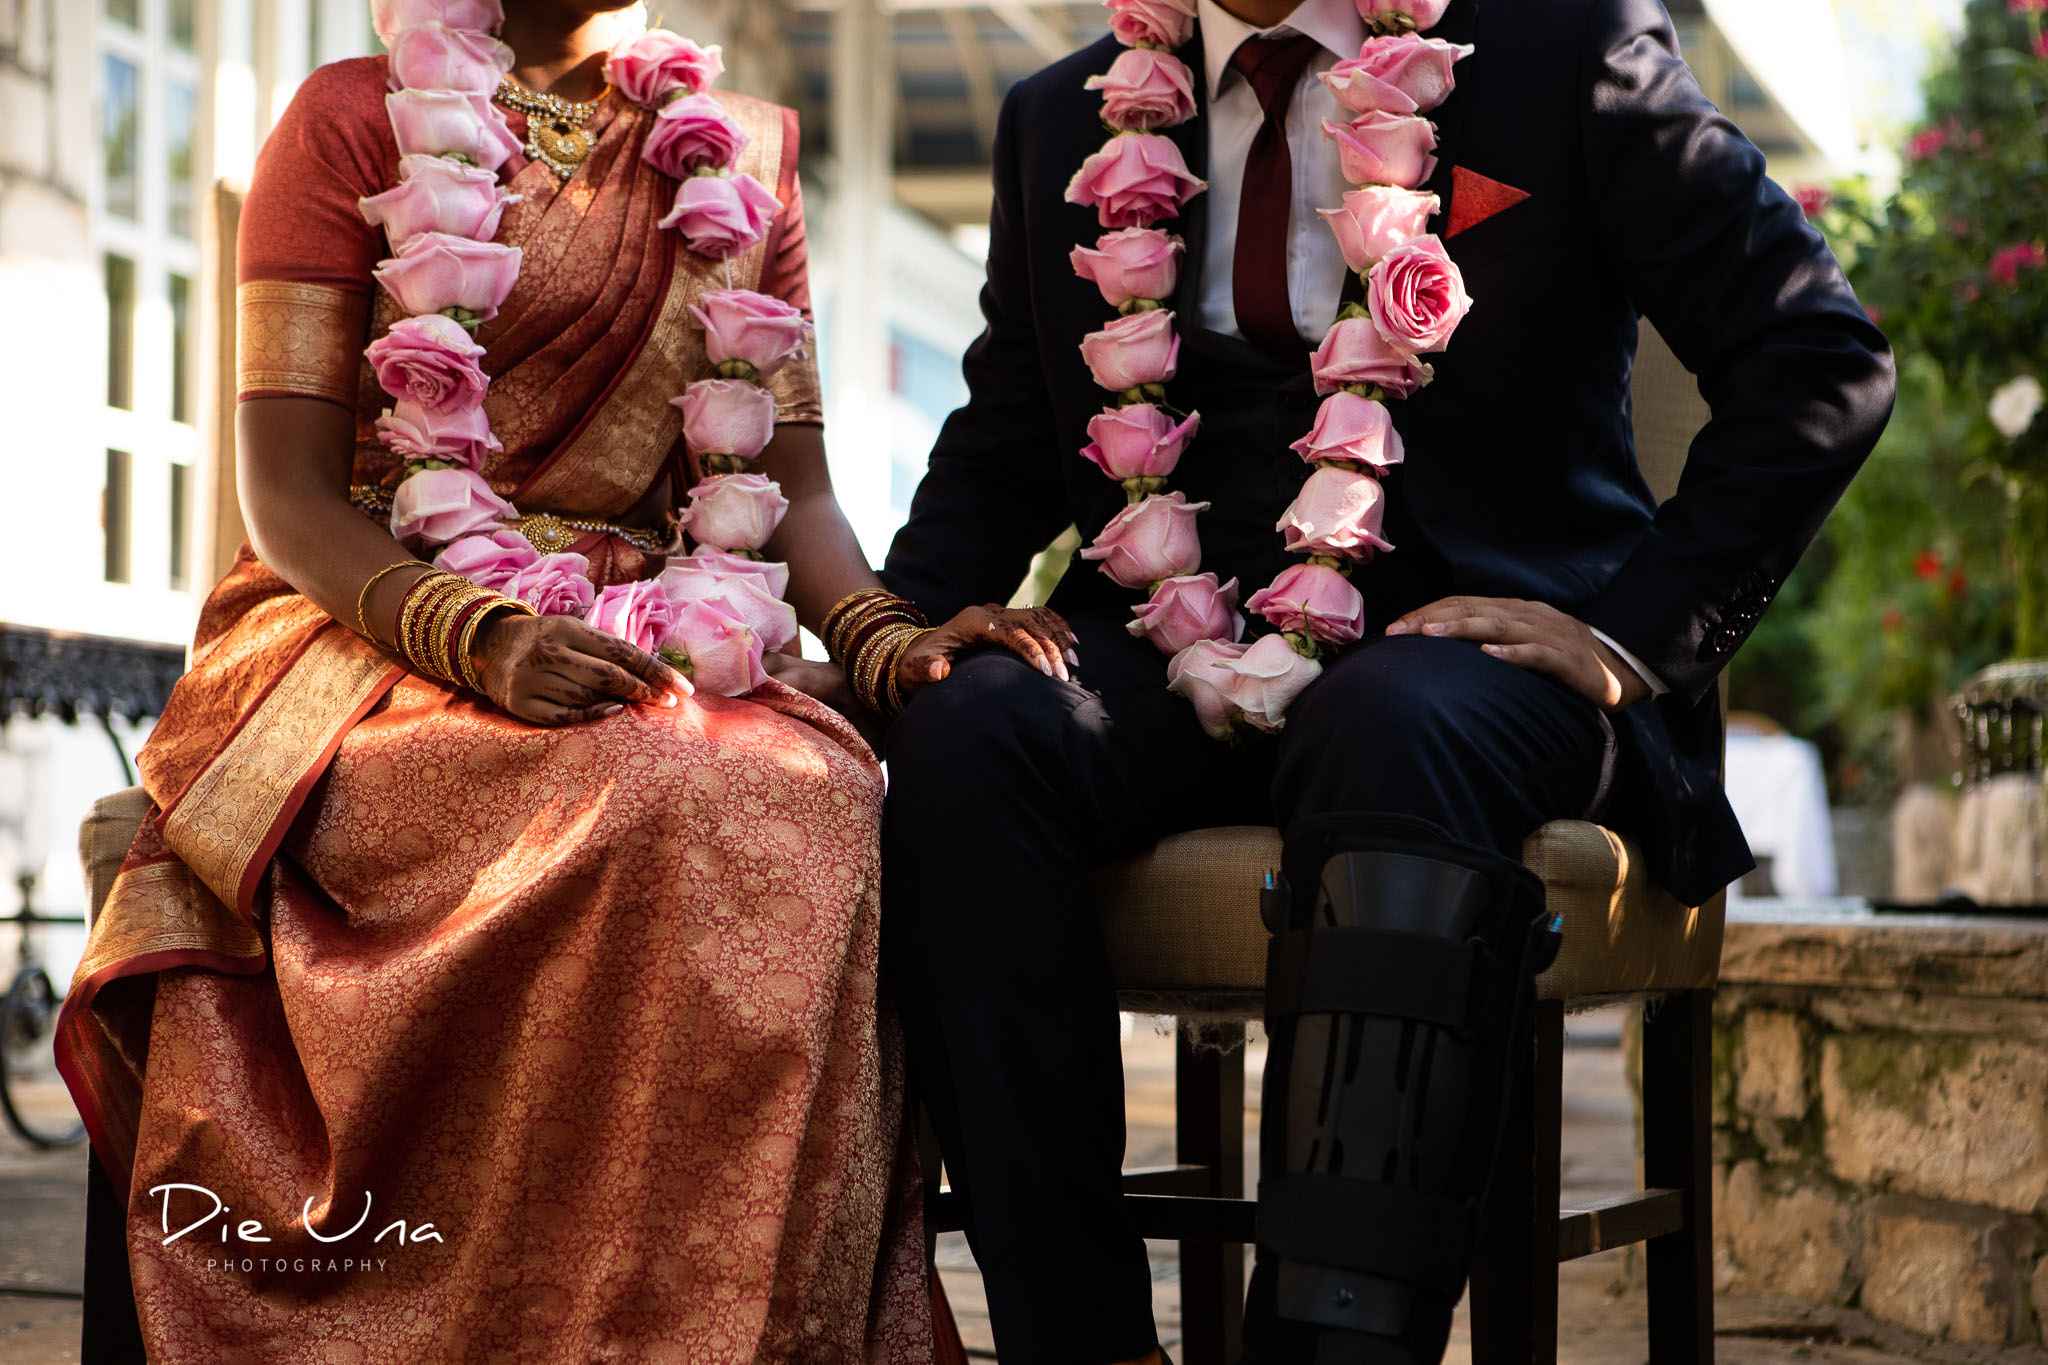 bride wearing saree and rose garland with groom during wedding ceremony.jpg